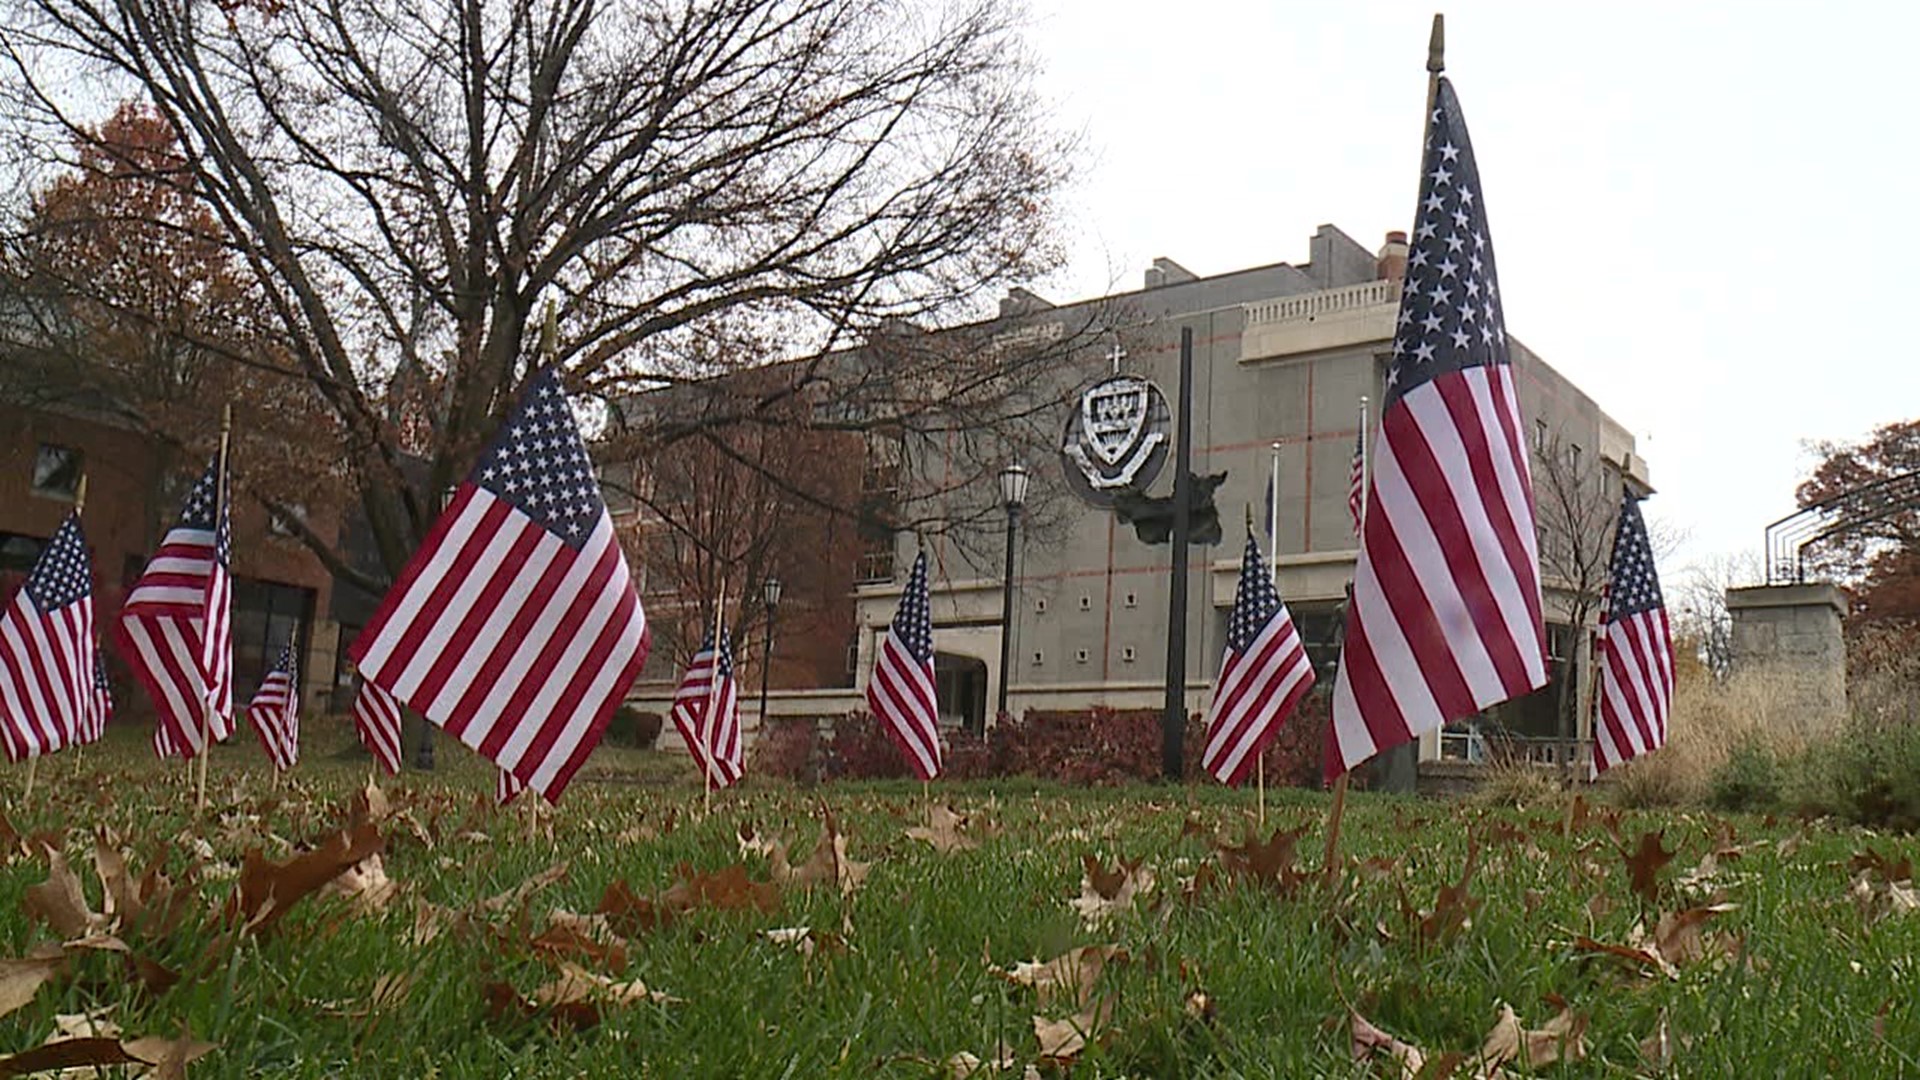 Members of the ROTC program covered a park on campus with small American flags.